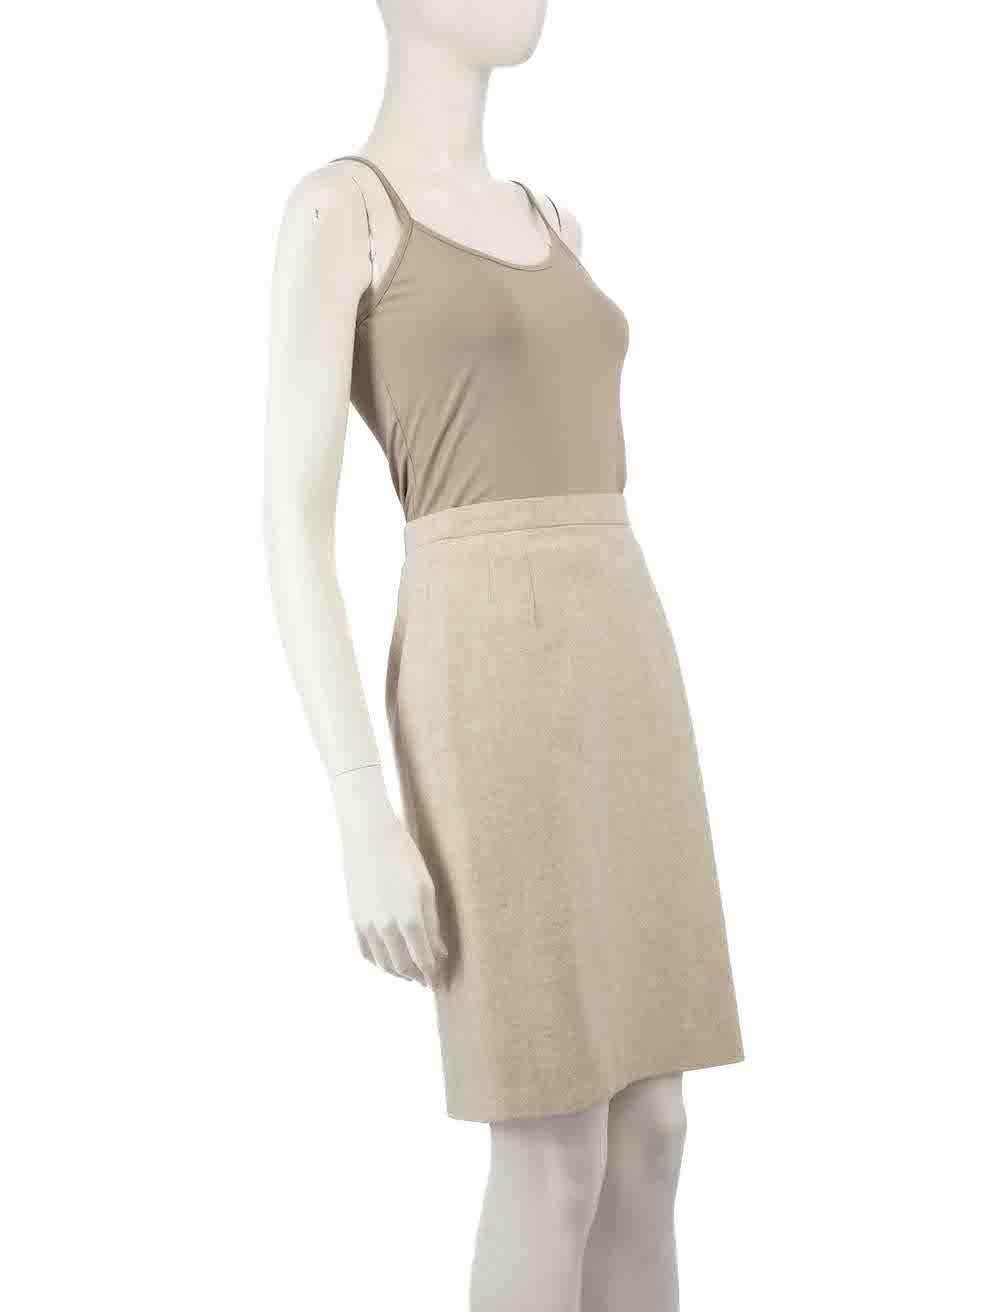 CONDITION is Very good. Hardly any visible wear to skirt is evident on this used Escada designer resale item.
 
 
 
 Details
 
 
 Beige
 
 Wool
 
 Pencil skirt
 
 Knee length
 
 Back button and zip fastening
 
 
 
 
 
 Made in Portugal
 
 
 
